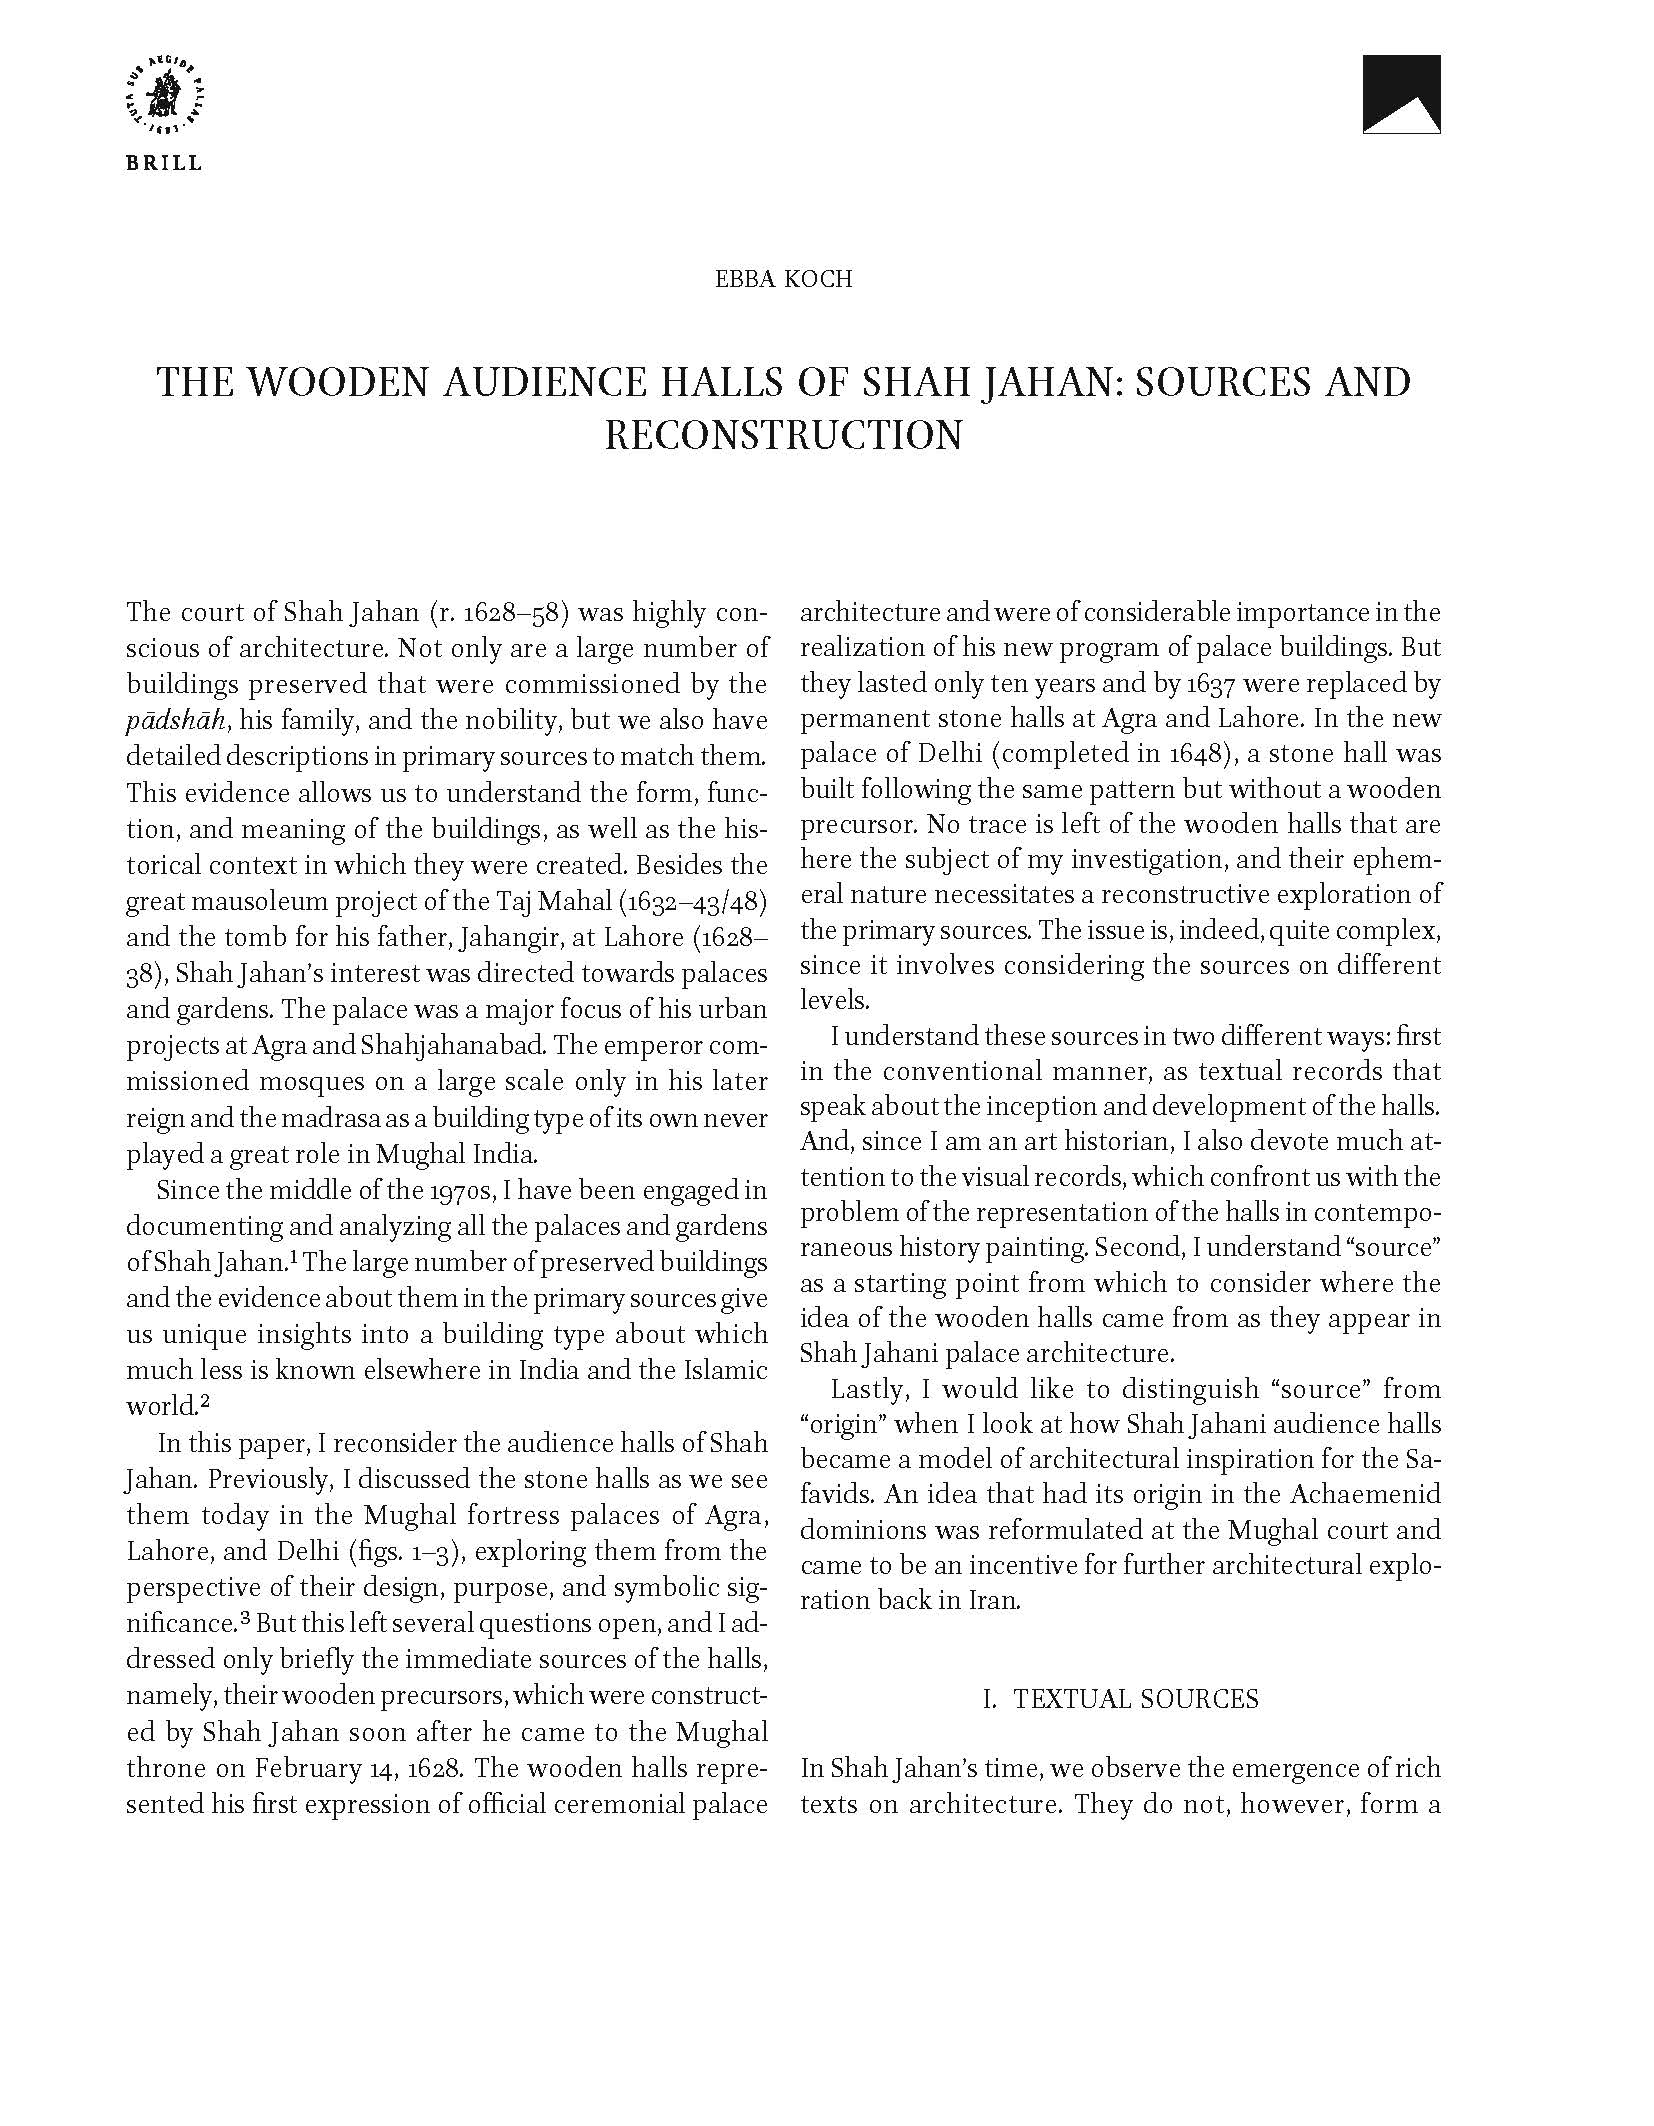 The Wooden Audience Halls of Shah Jahan: Sources and Reconstruction